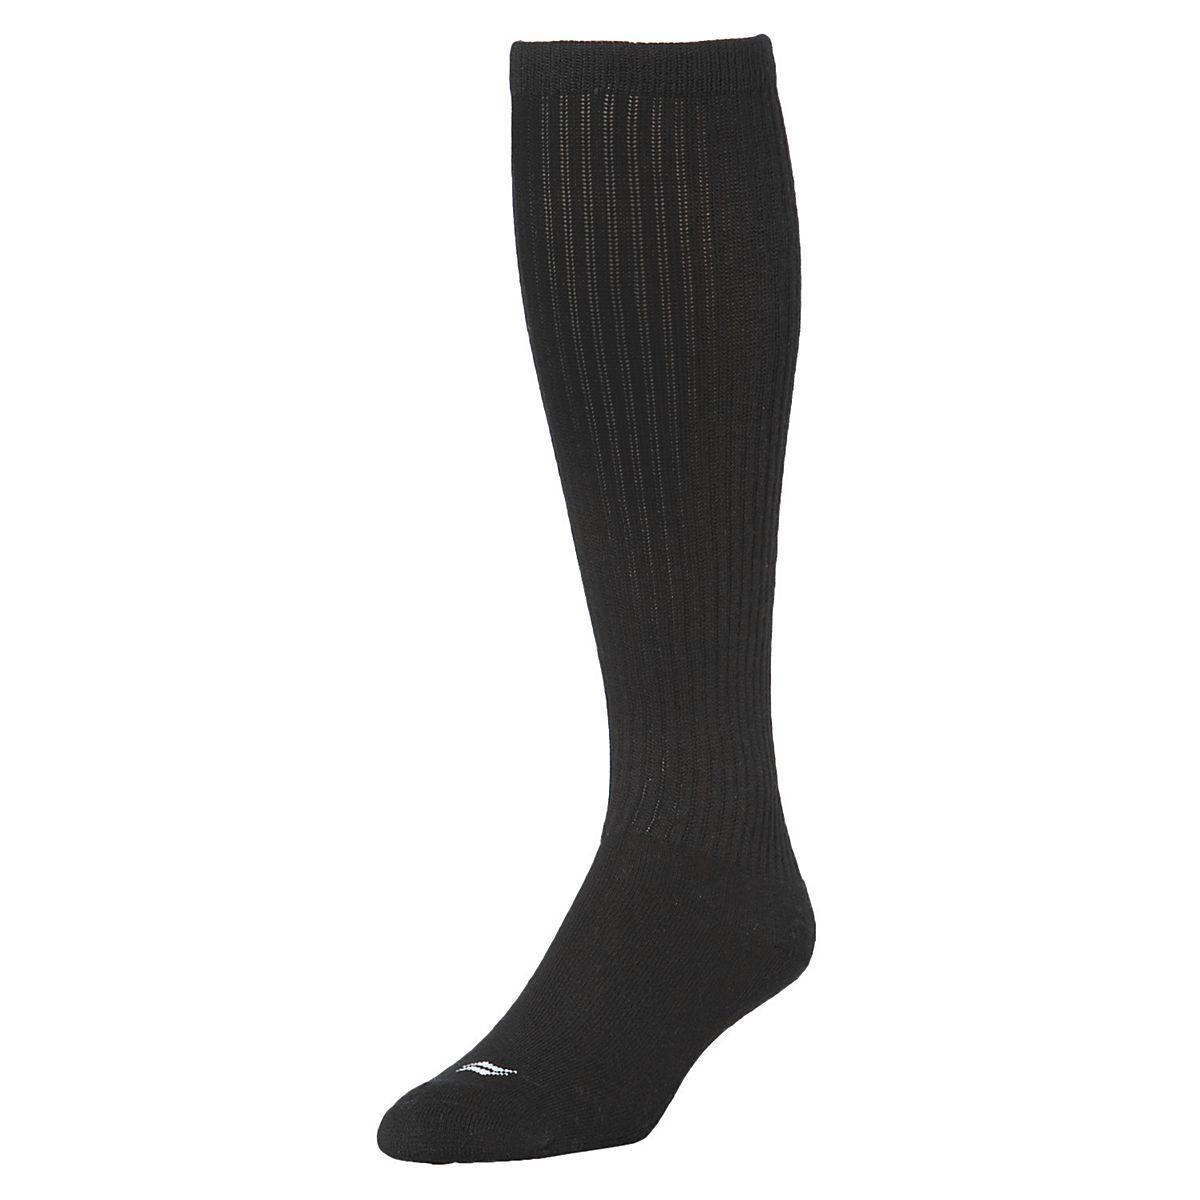 Sof Sole Soccer Over-the-Calf Team Athletic Performance Youth Socks 2 Pair Child 9-Youth 1 Gold 